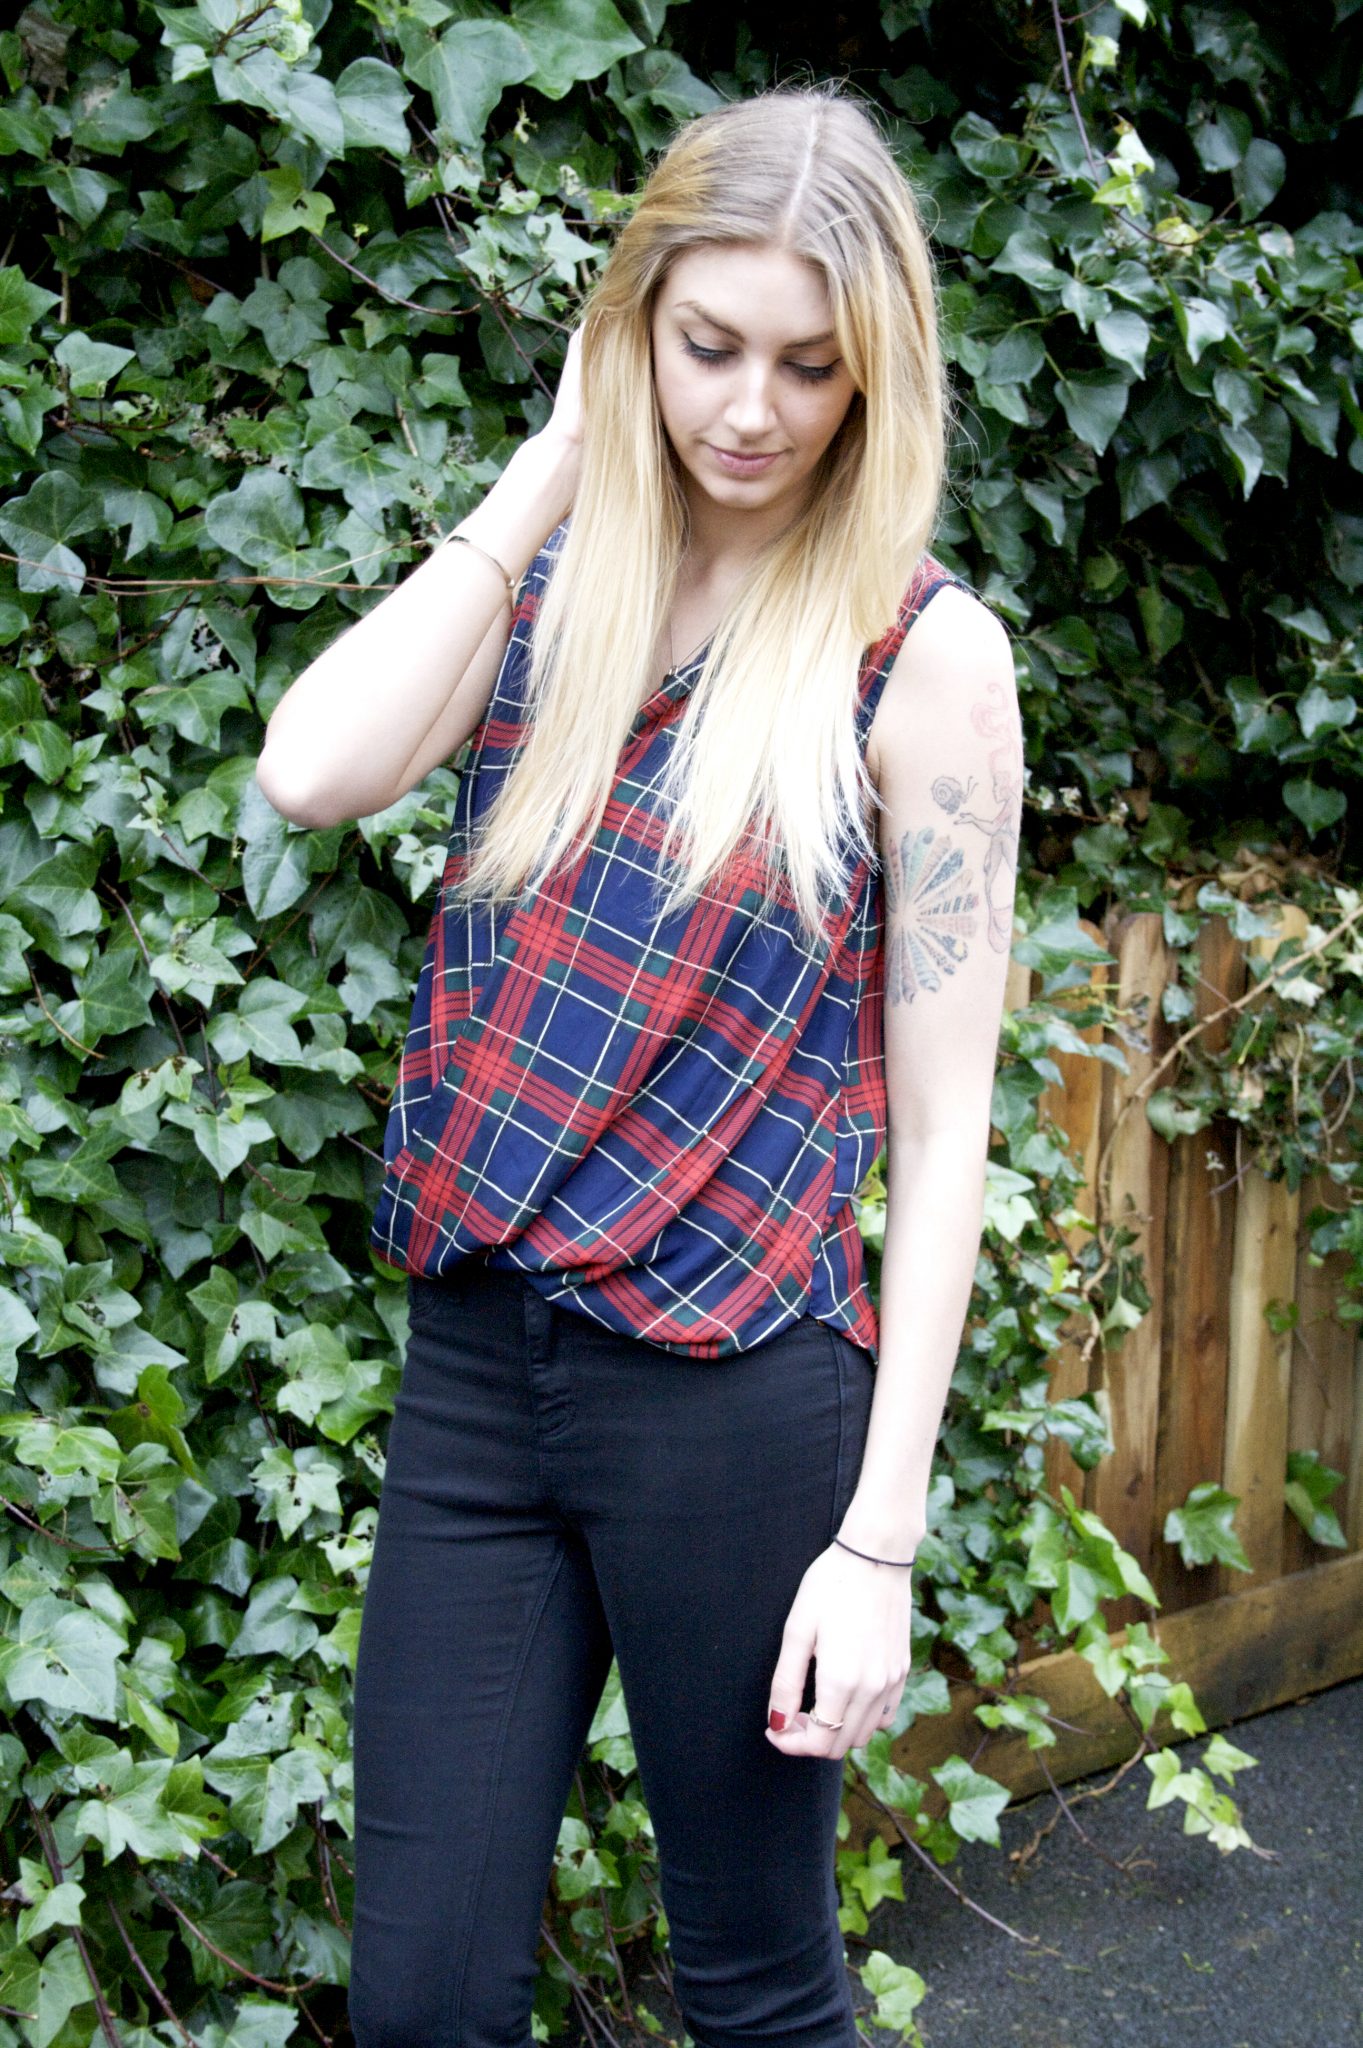 Manchester based fashion and lifestyle blogger. Tiger mist tartan vest, river island jeans, toni and guy blonde, tattoos.